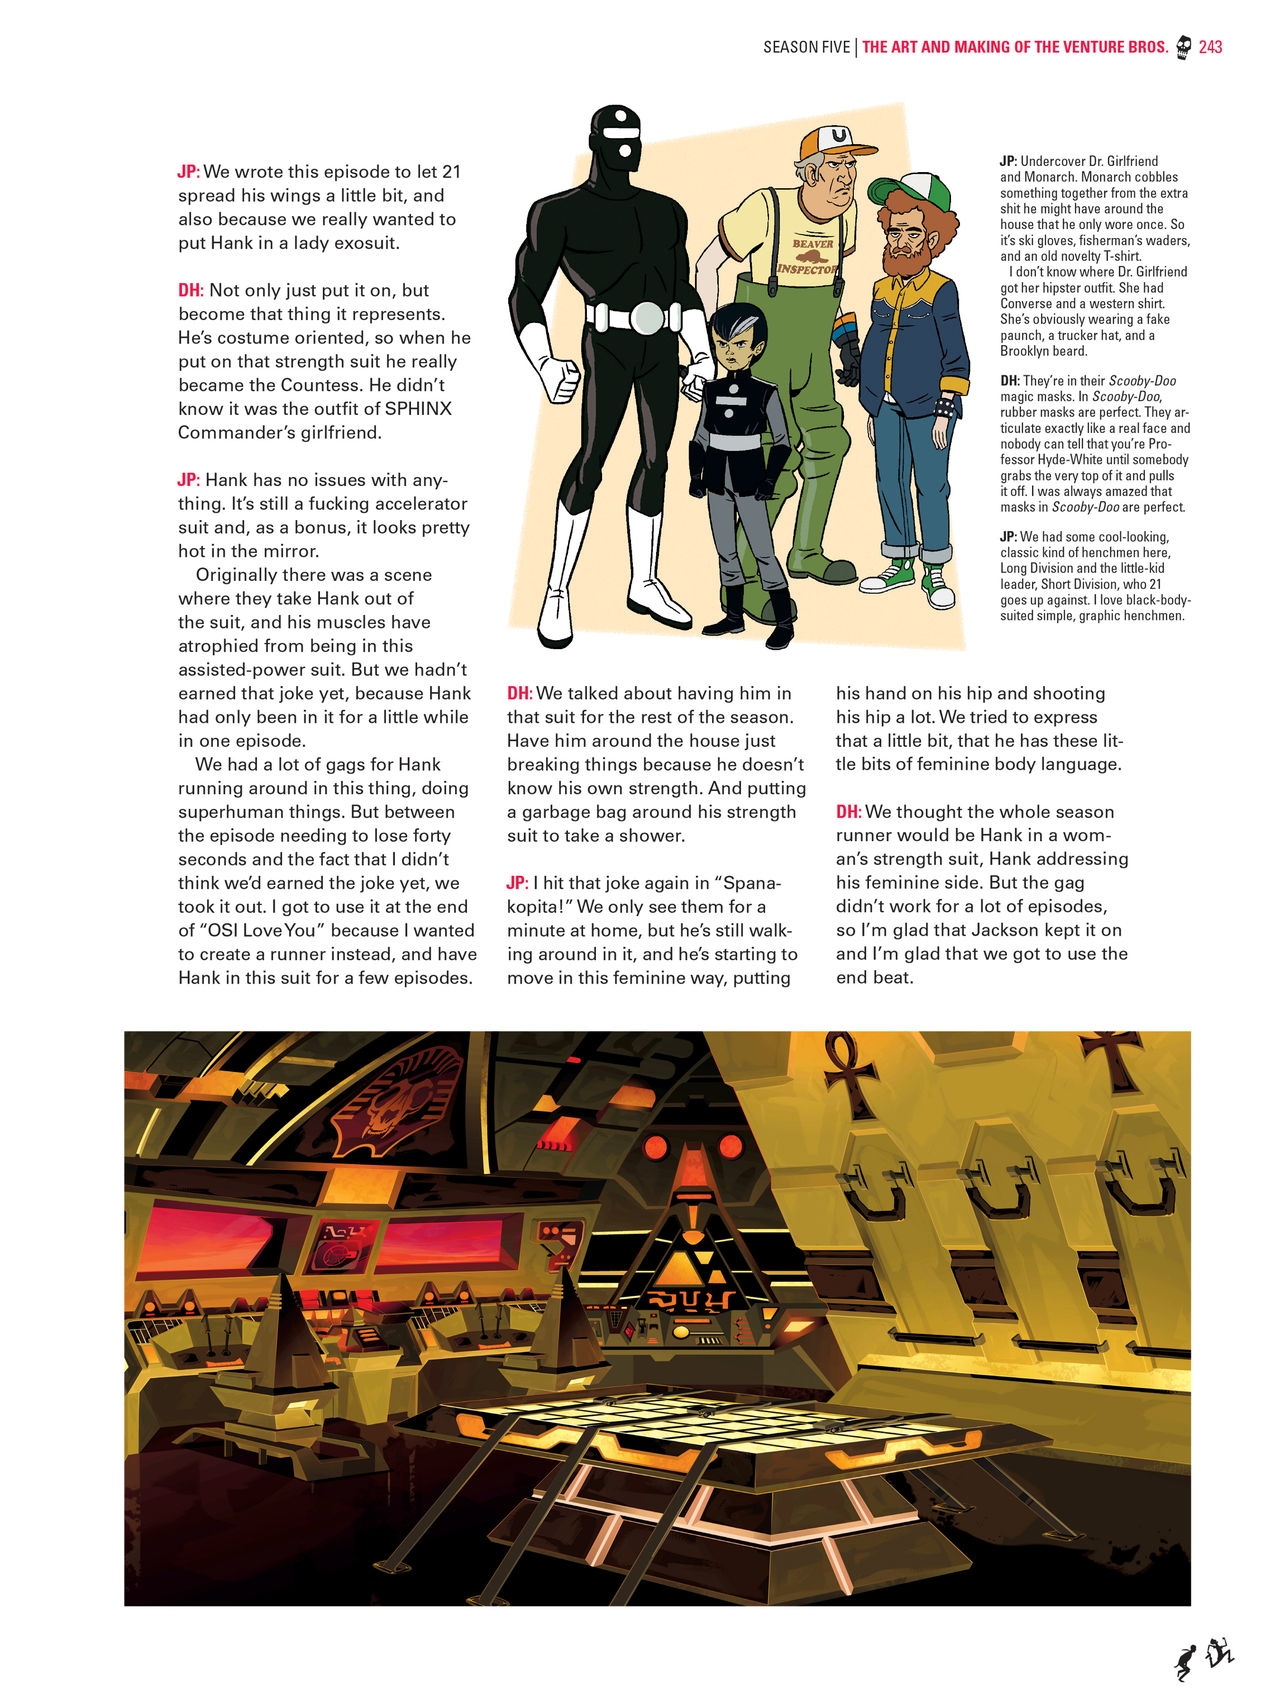 Go Team Venture! - The Art and Making of the Venture Bros 241